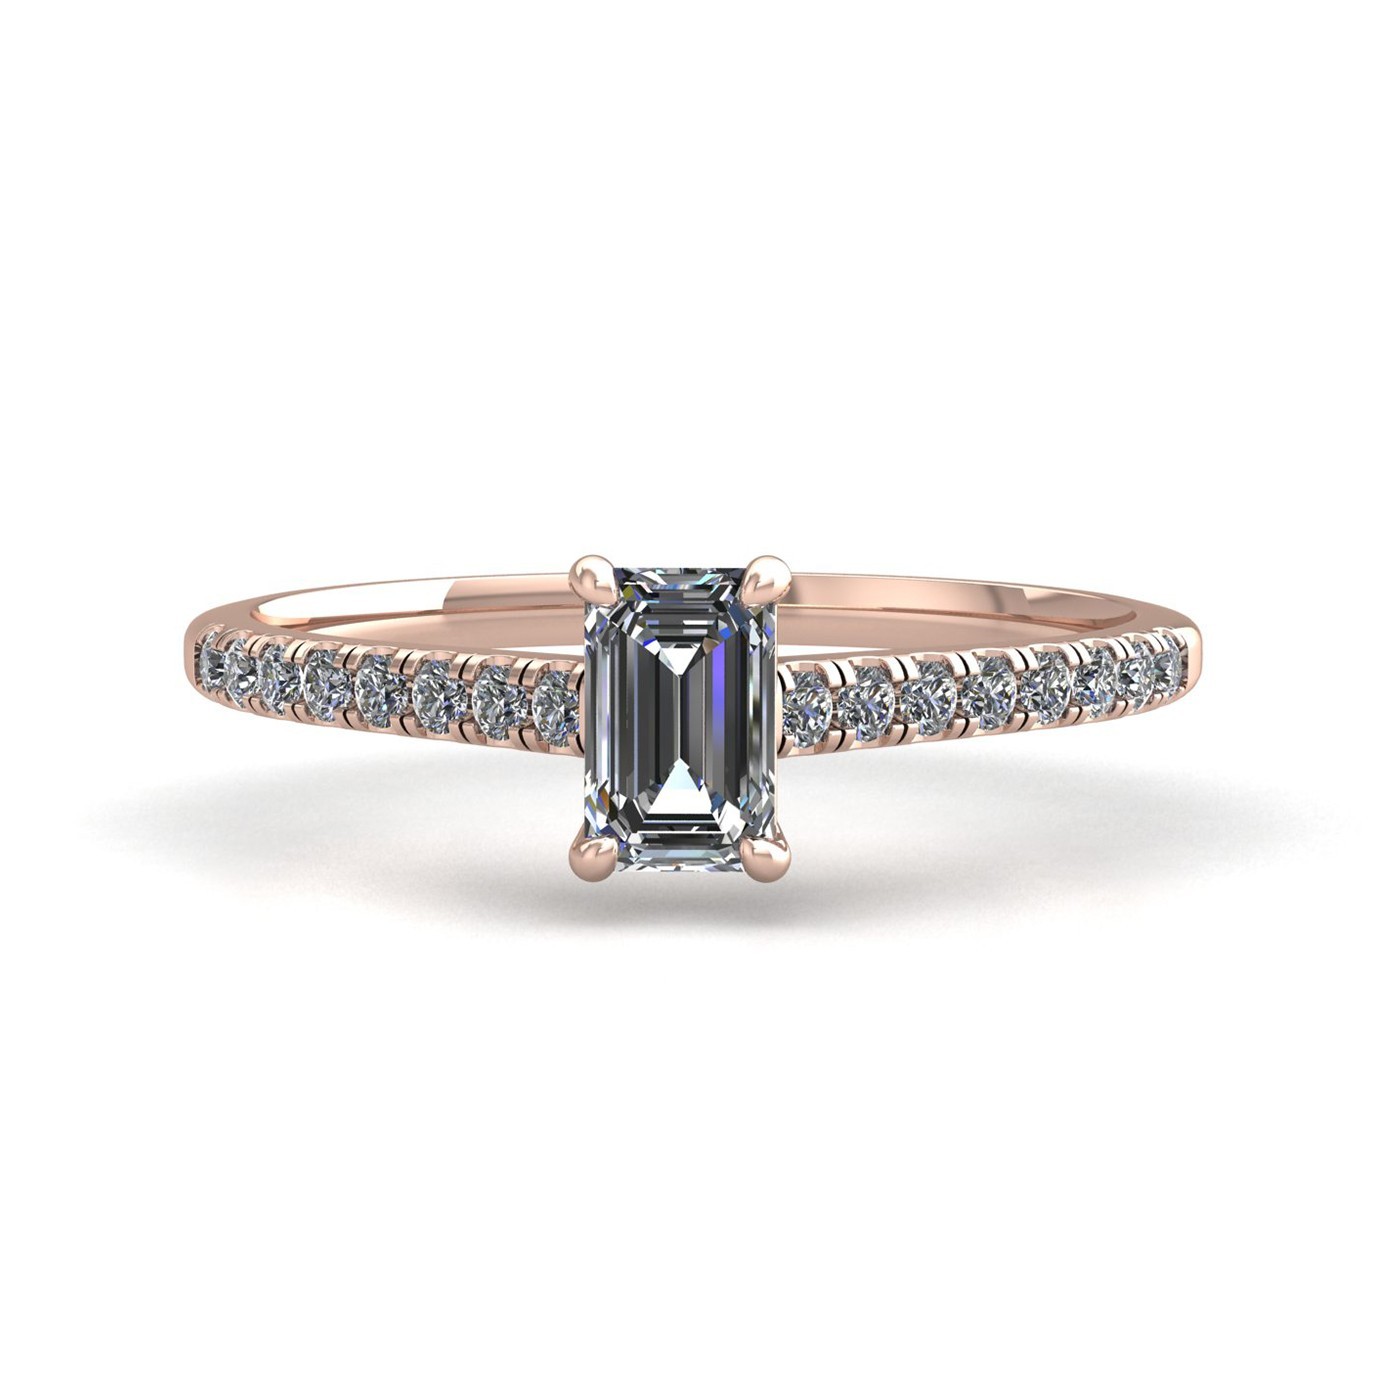 18k rose gold 0,50 ct 4 prongs emerald cut diamond engagement ring with whisper thin pavÉ set band Photos & images